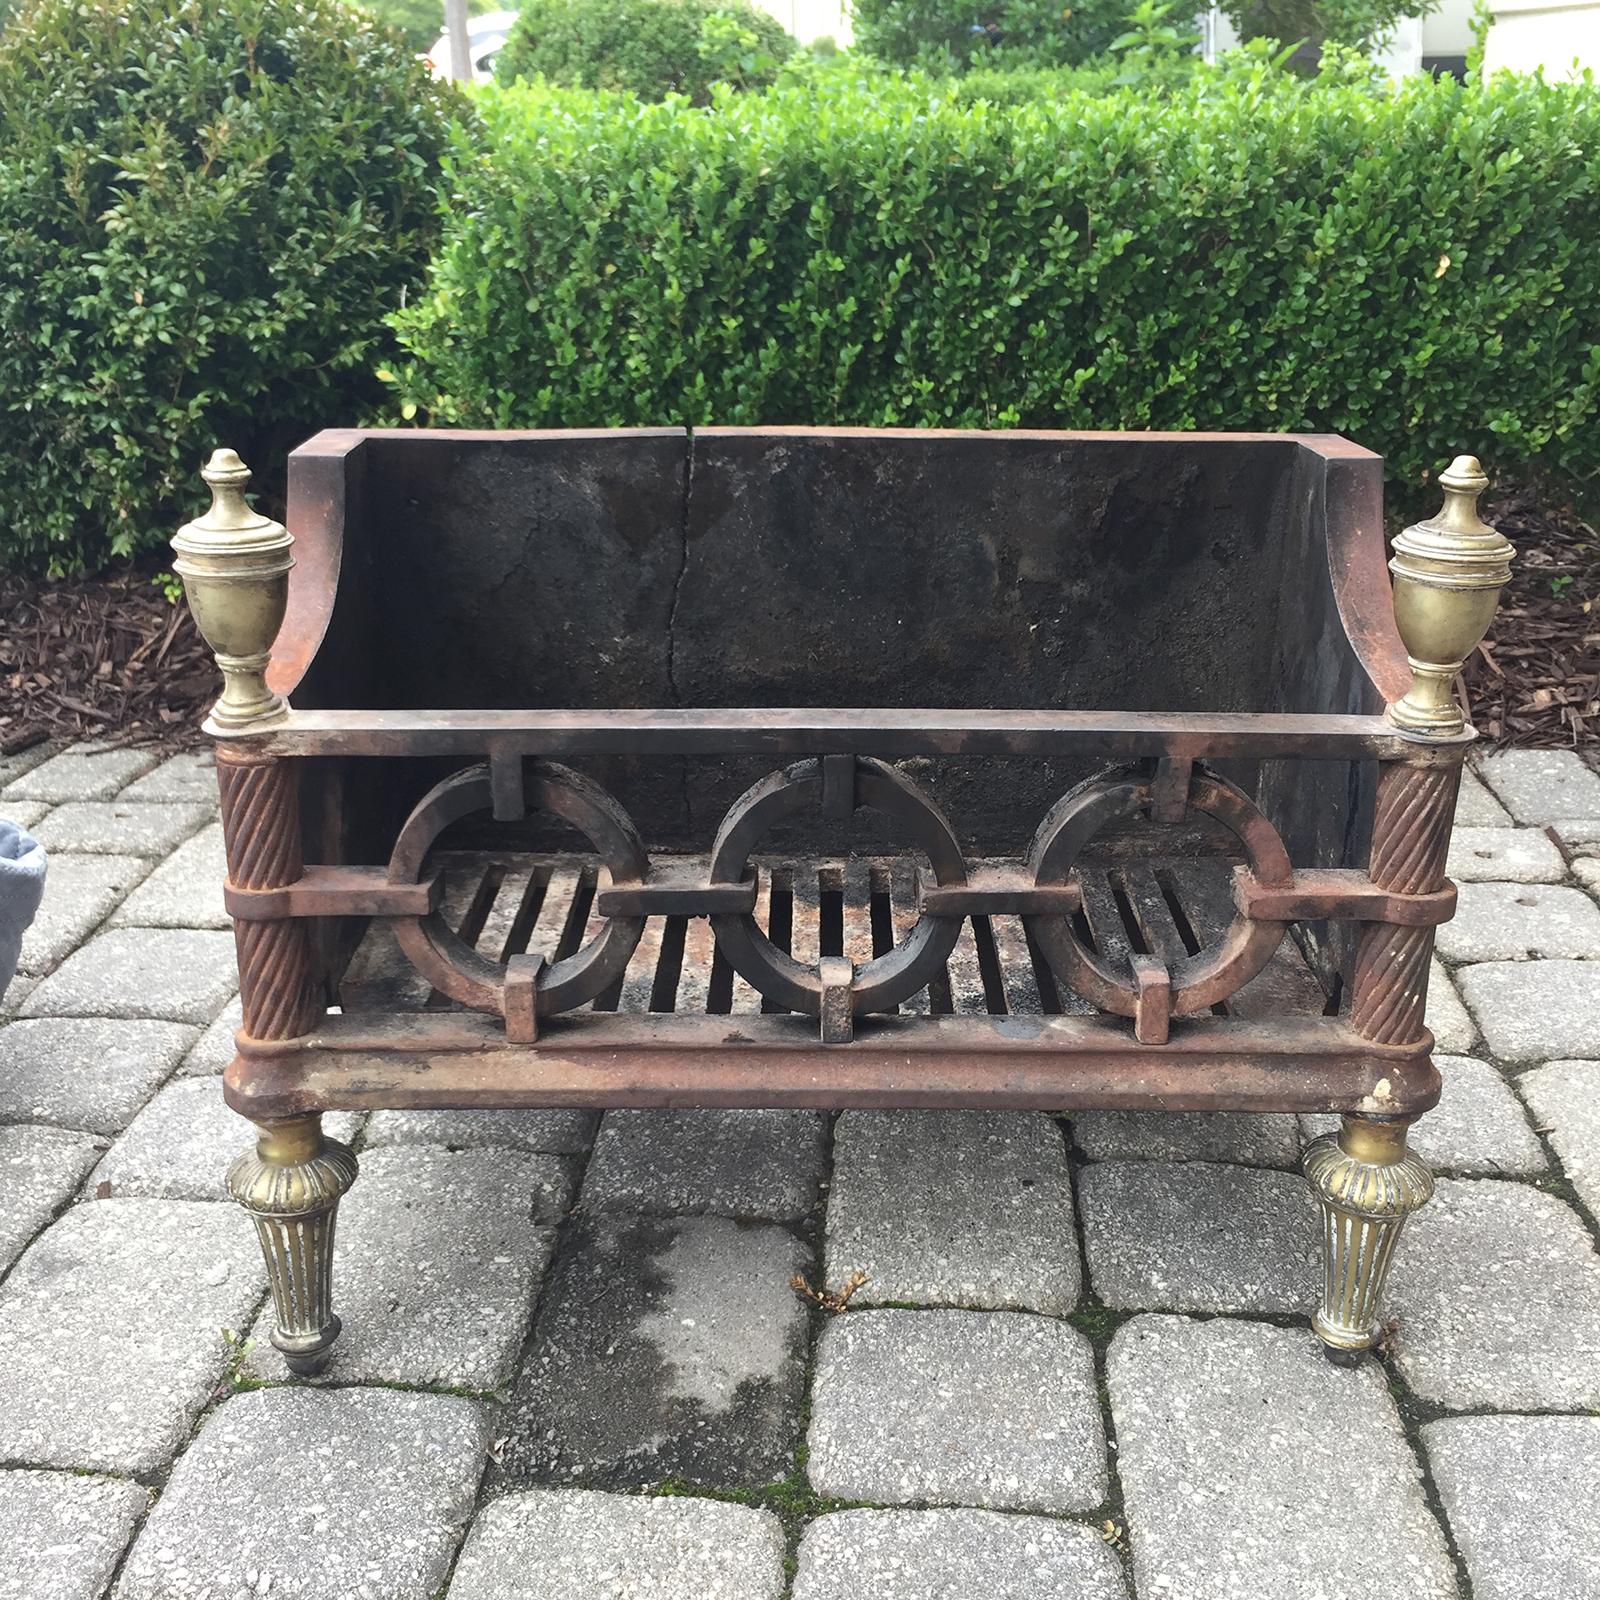 19th-20th century George III style cast iron and brass fire grate.